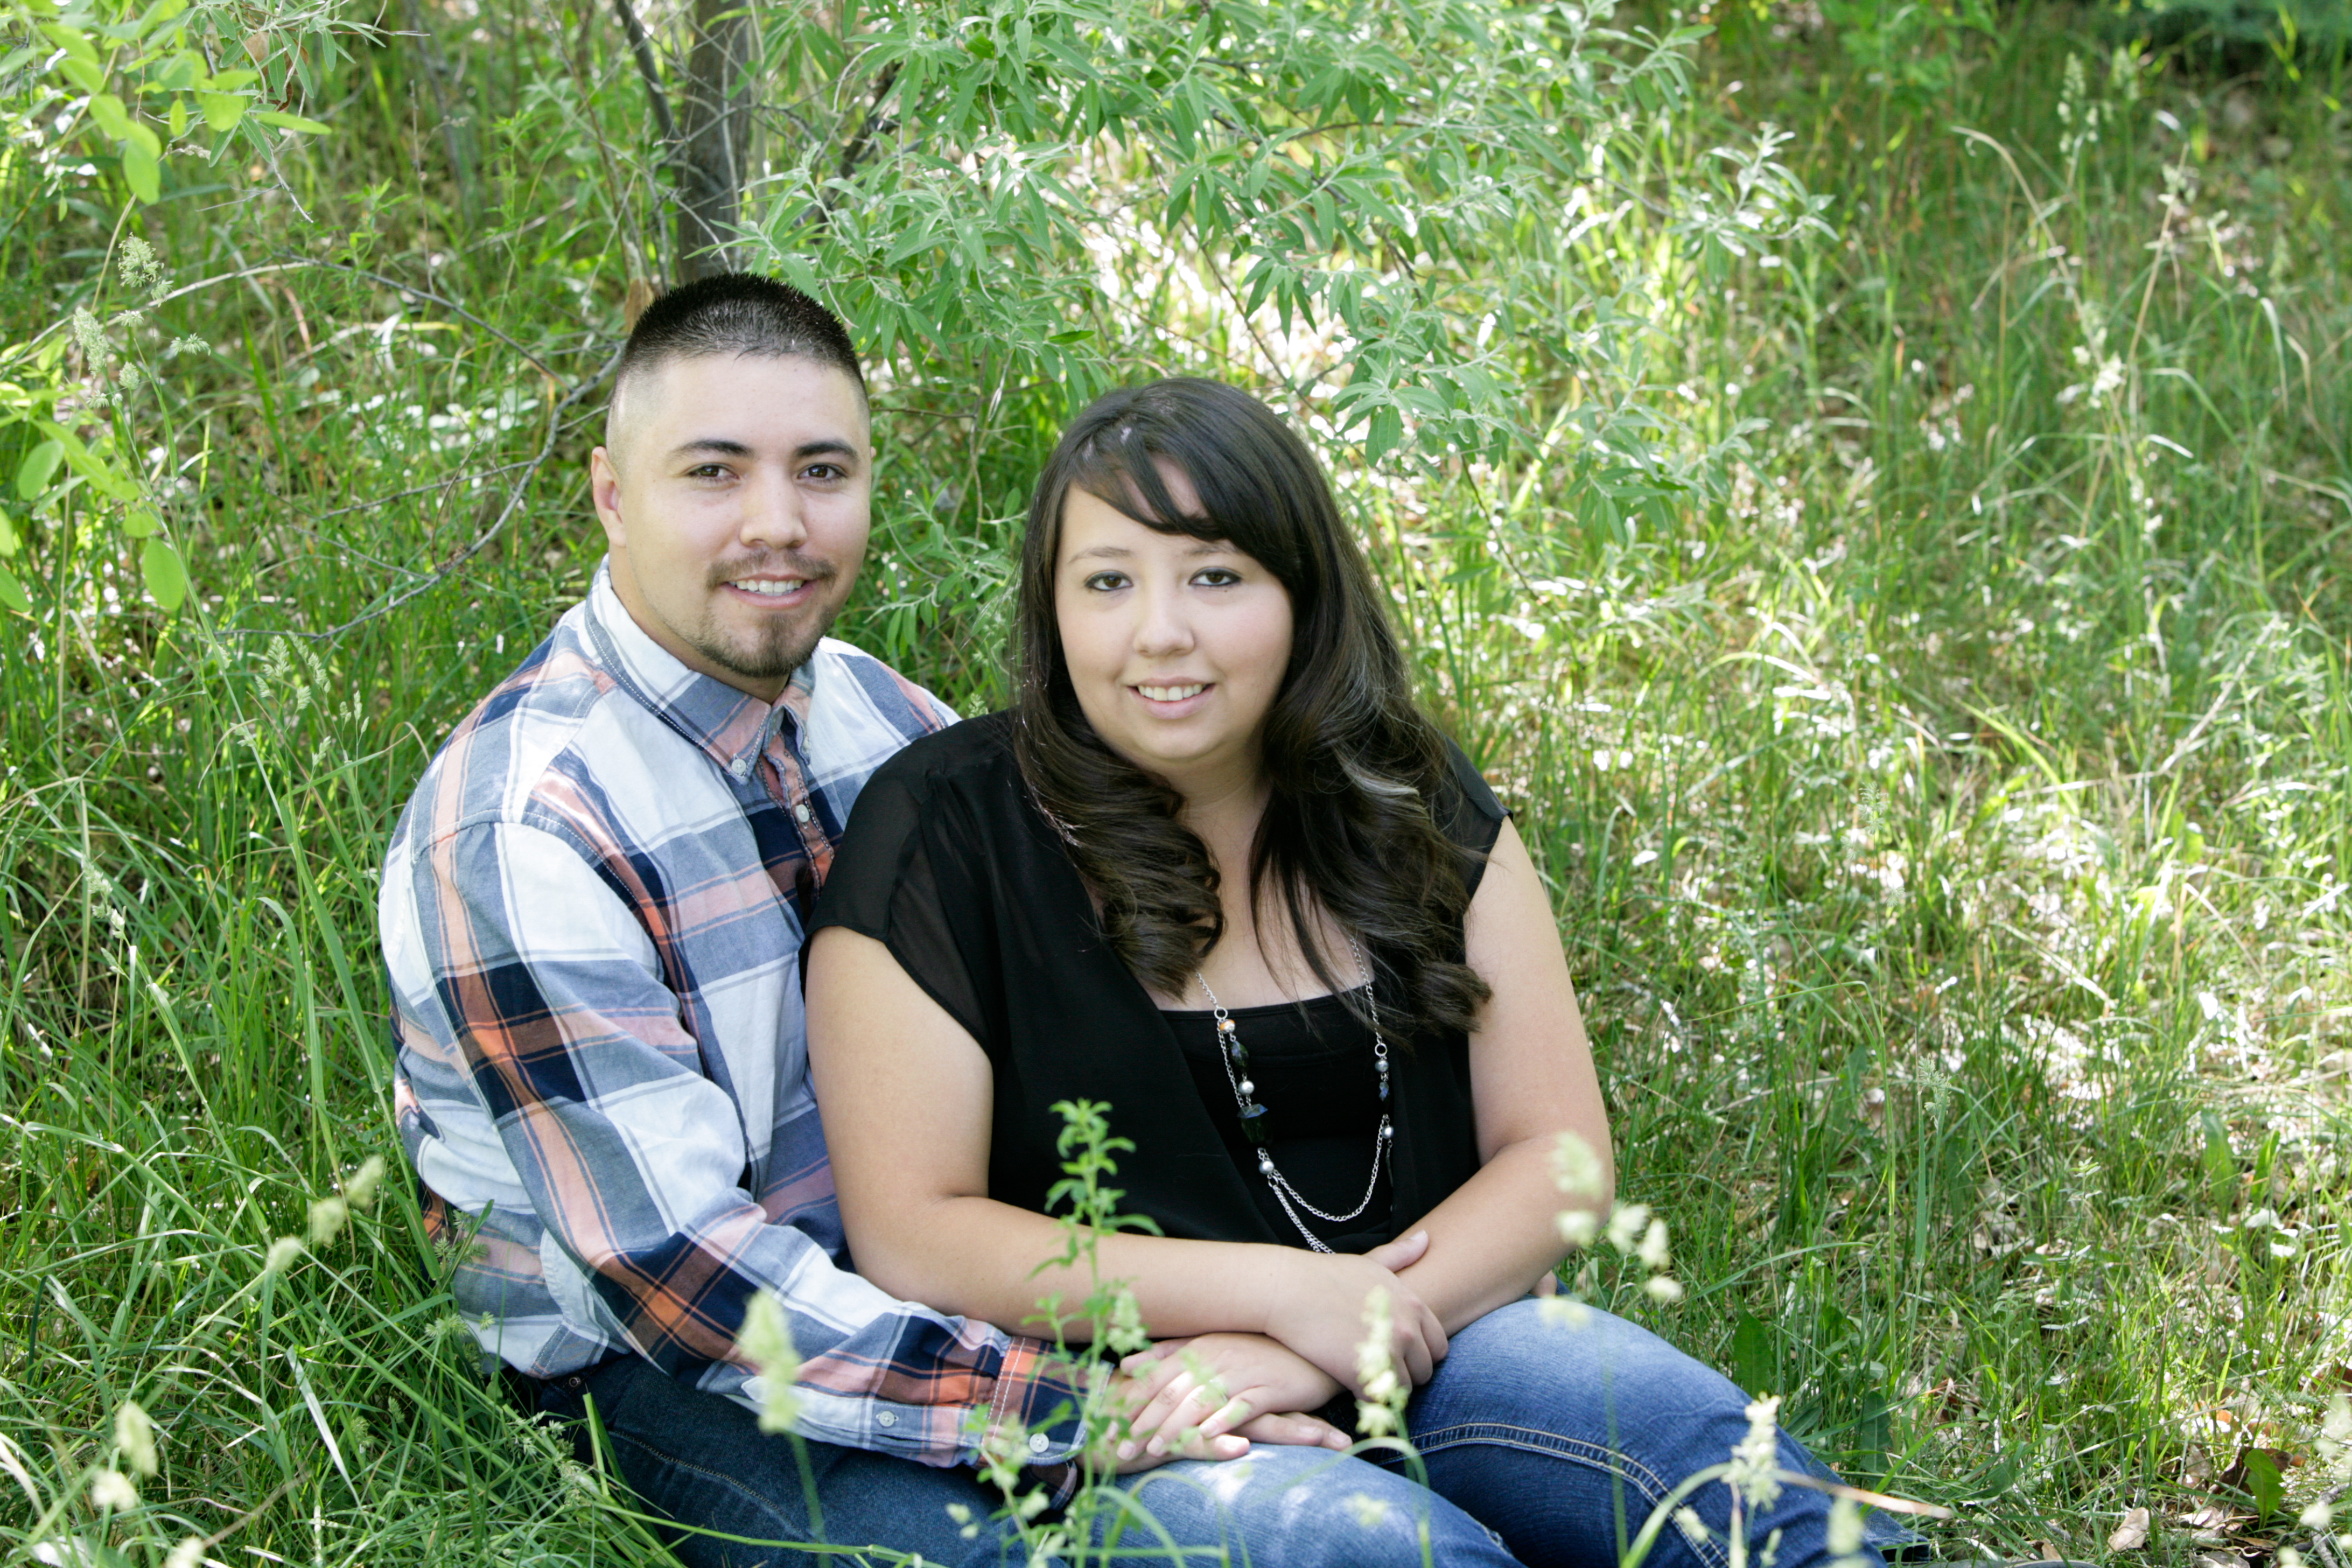 Engaged Couple from Taos, NM